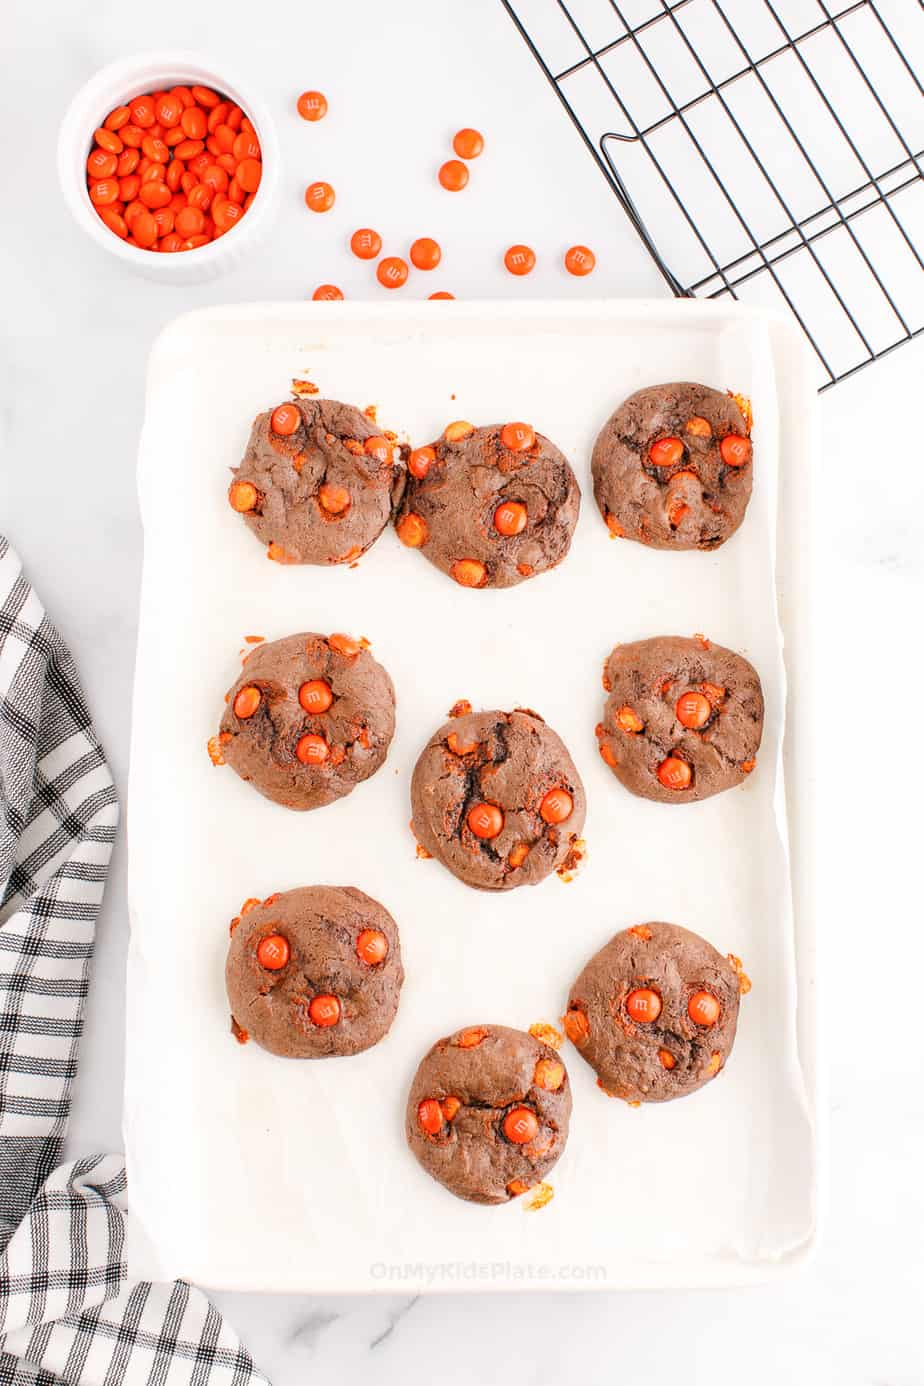 Chocolate cookies with orange candies baked on a pan with a wire rack and more orange candies in a bowl next to the pan